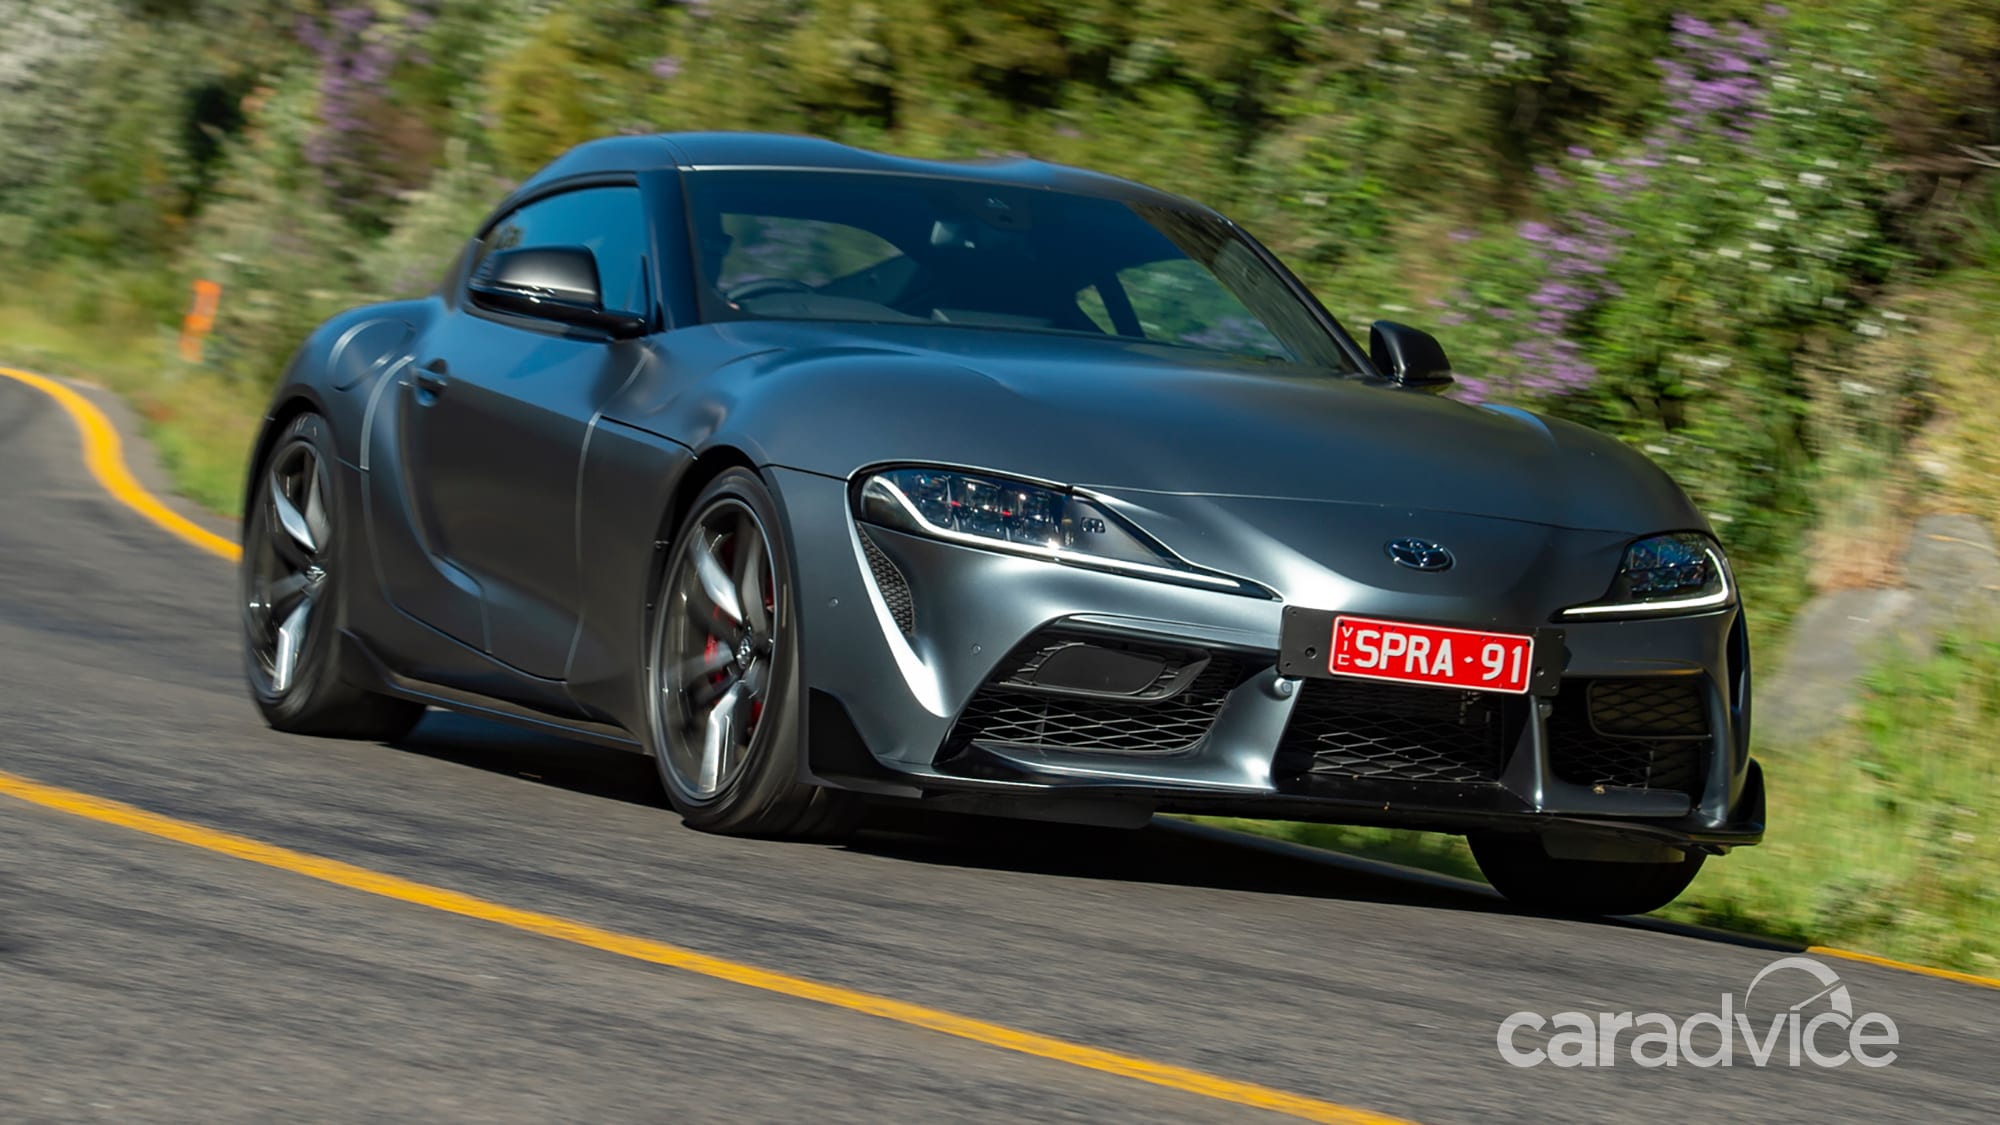 2021 Toyota GR Supra price and specs: More power, bigger ...